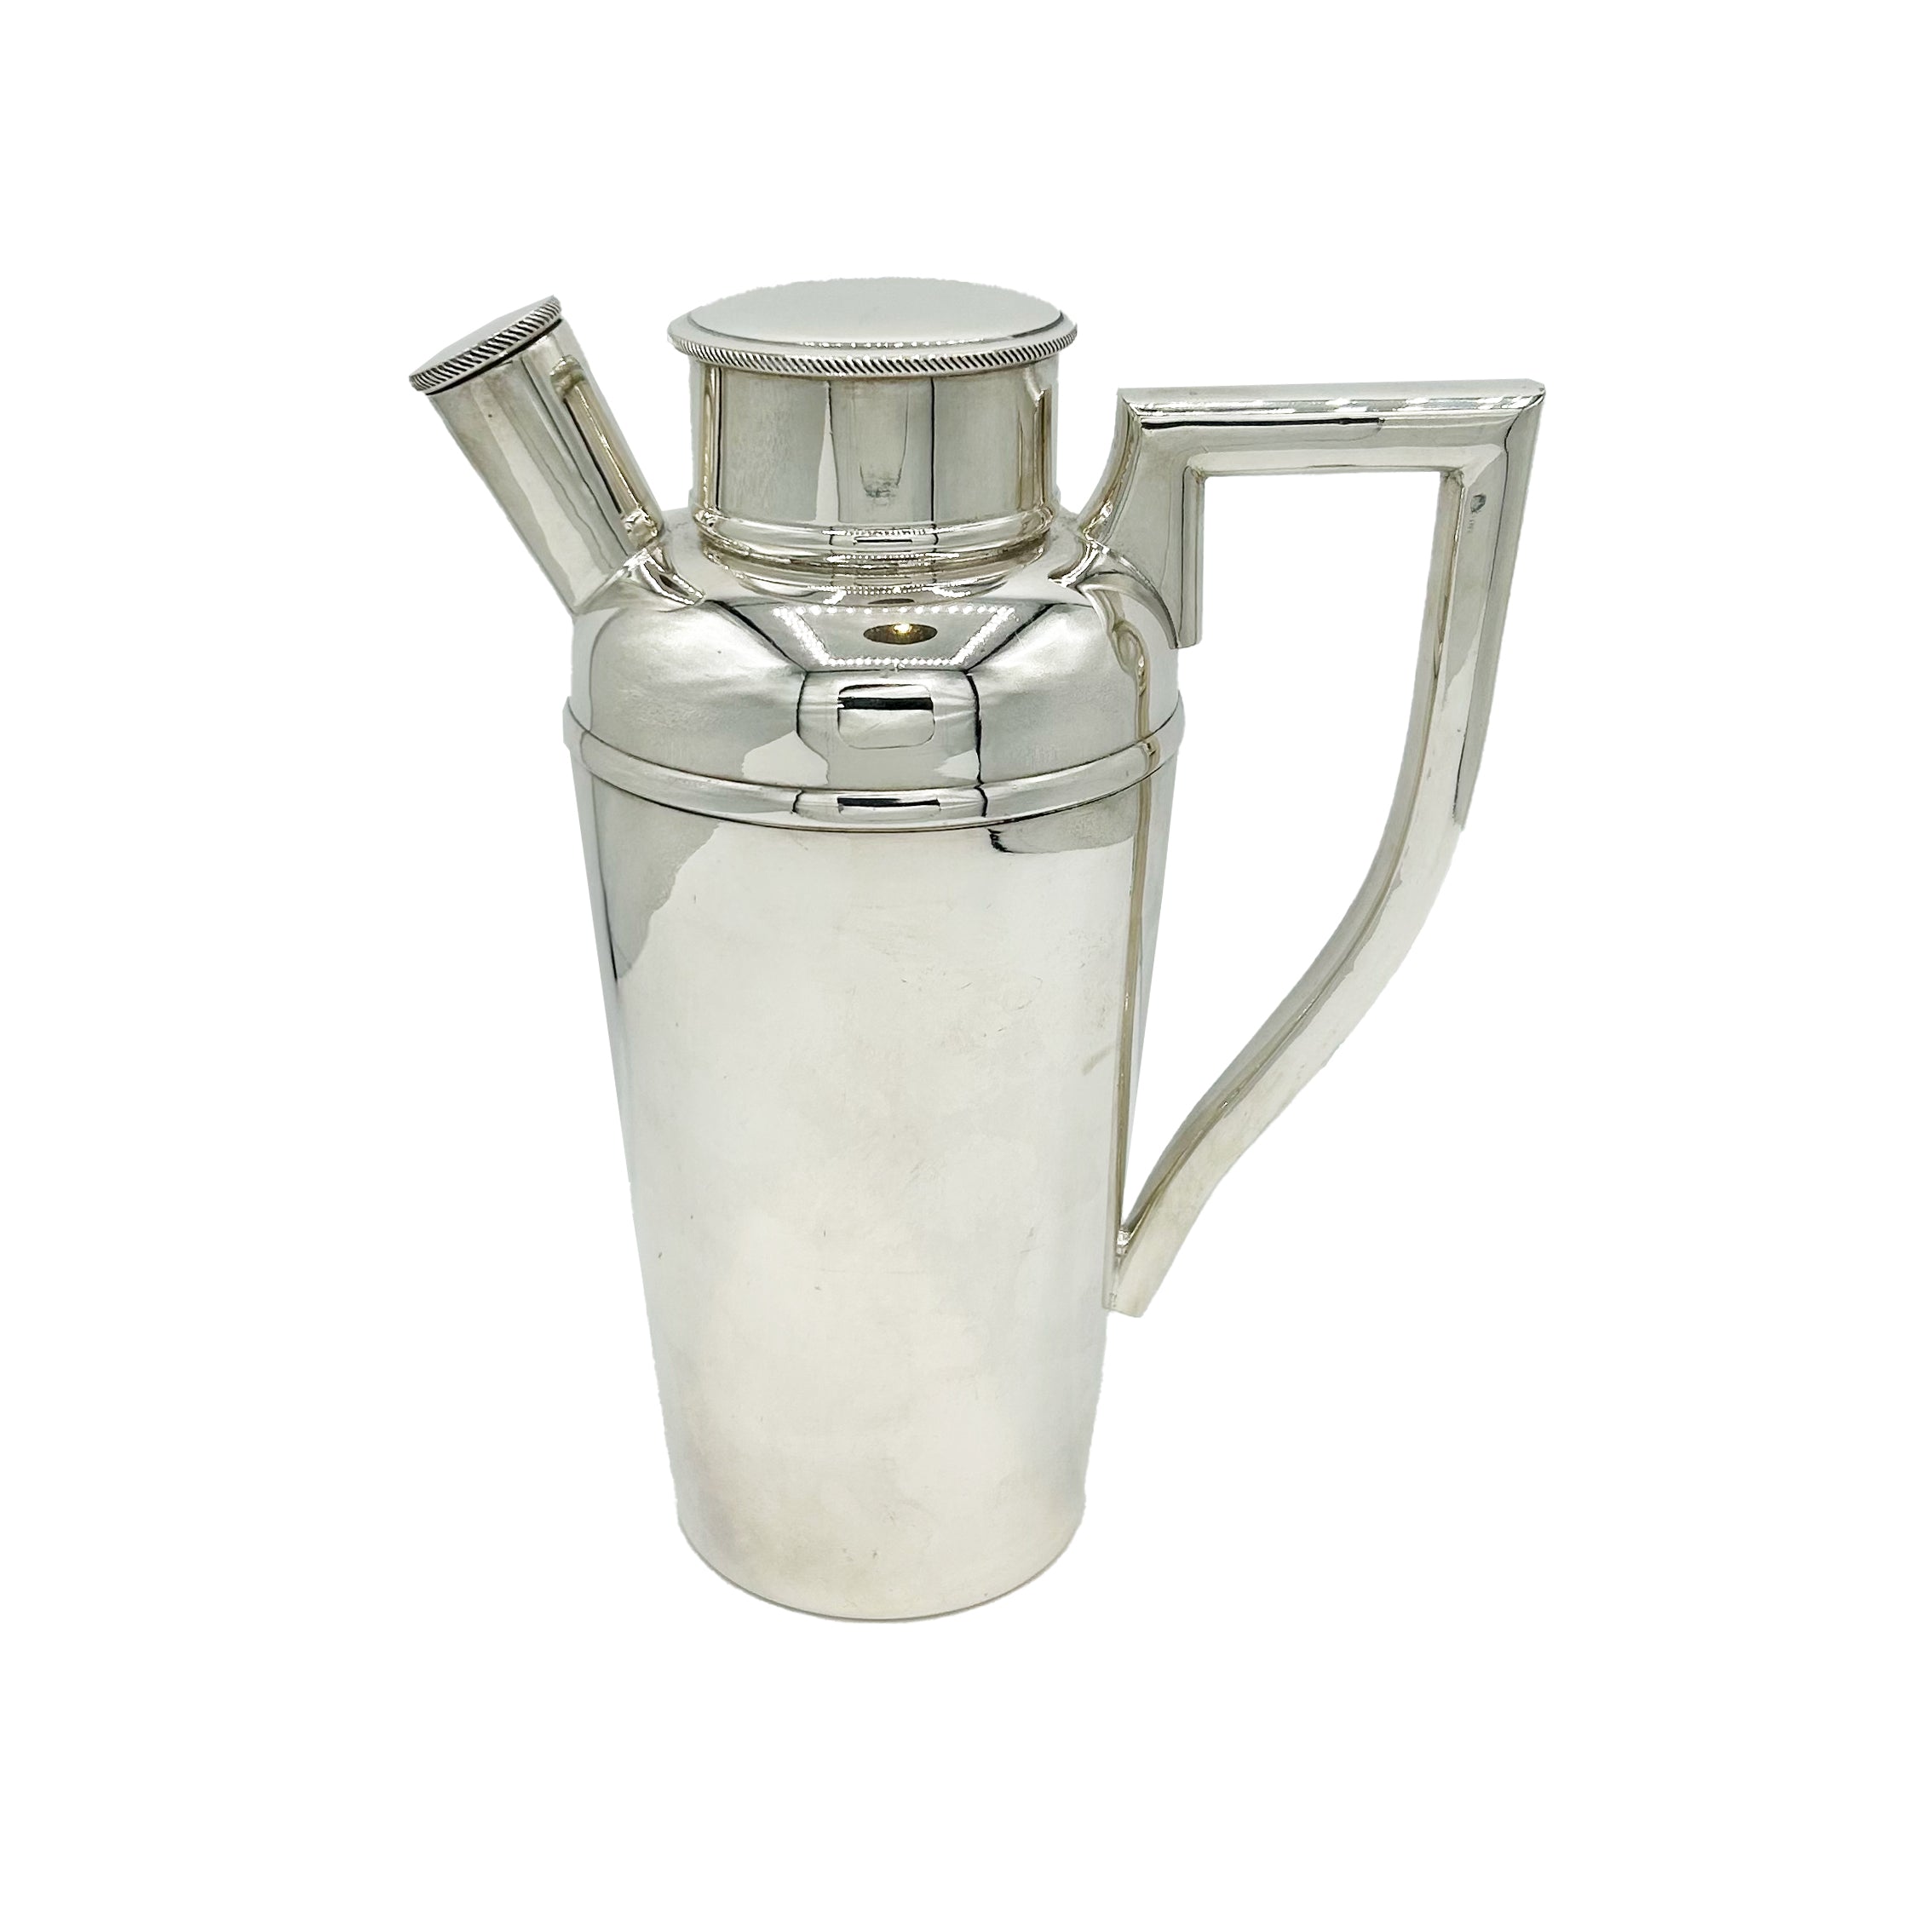 Antique Silver Plated Cocktail Shaker c.1920.jpg